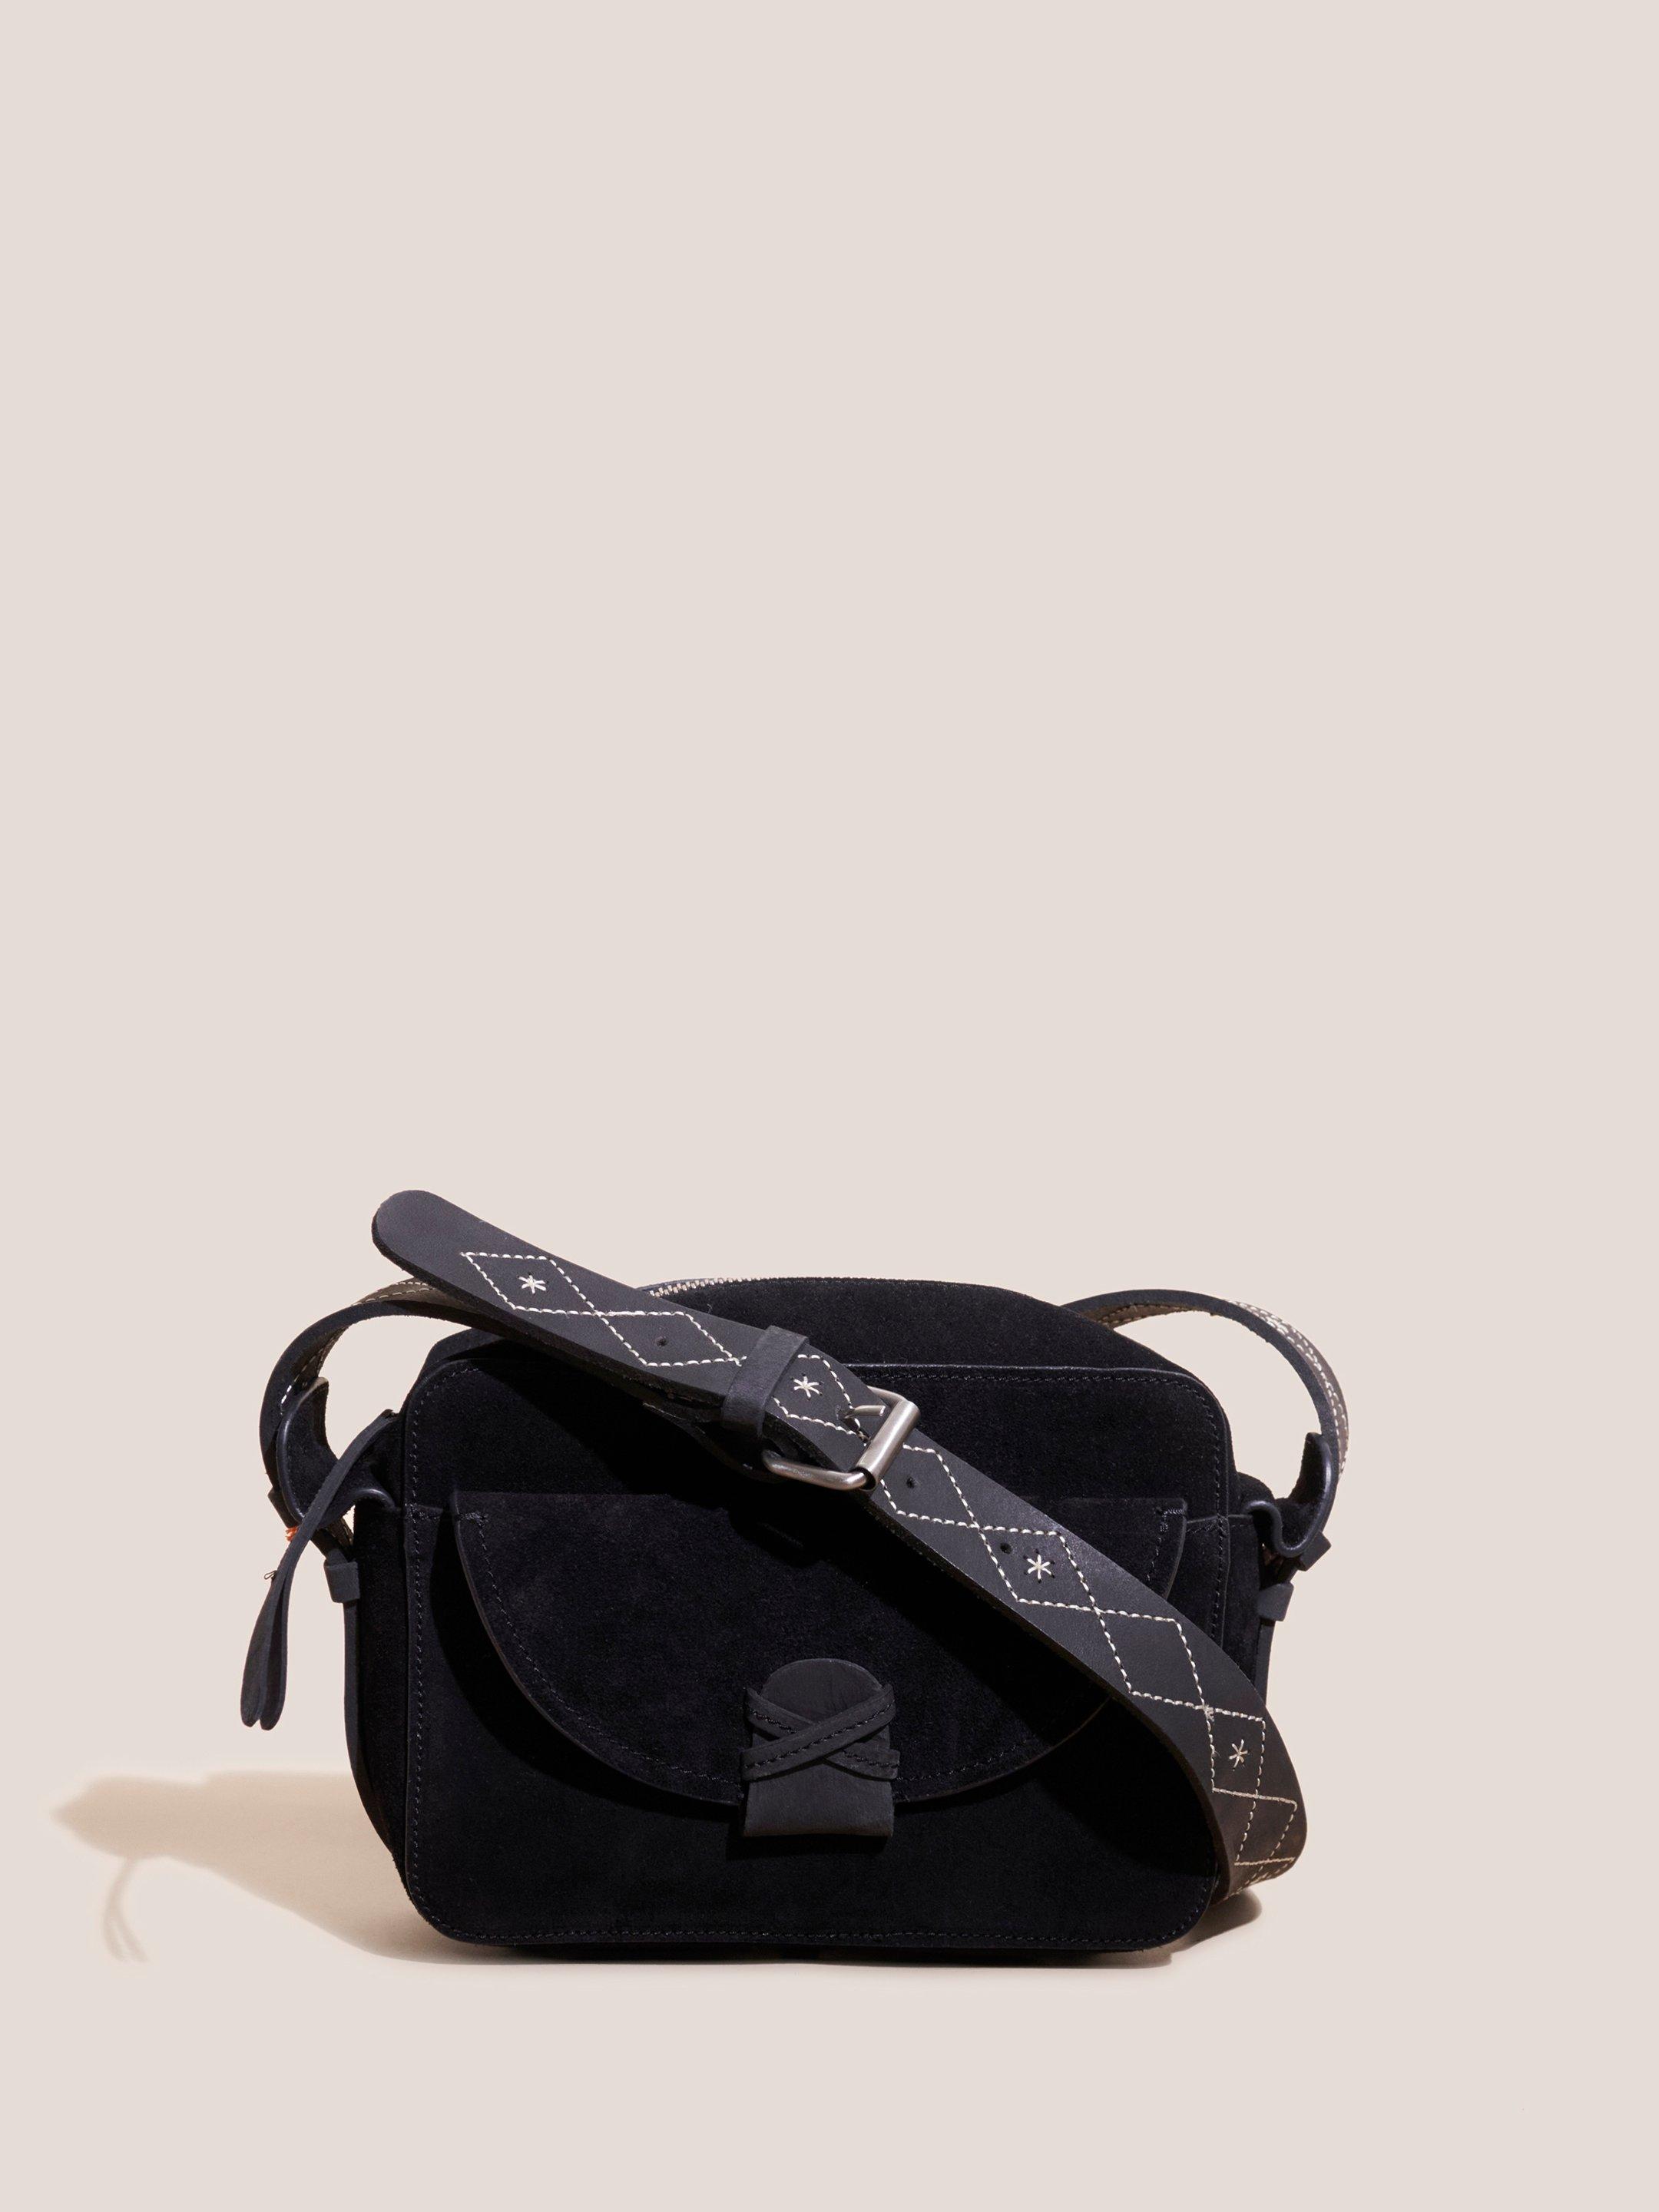 Lola Embroidered Camera Bag in BLK MLT - MIXED